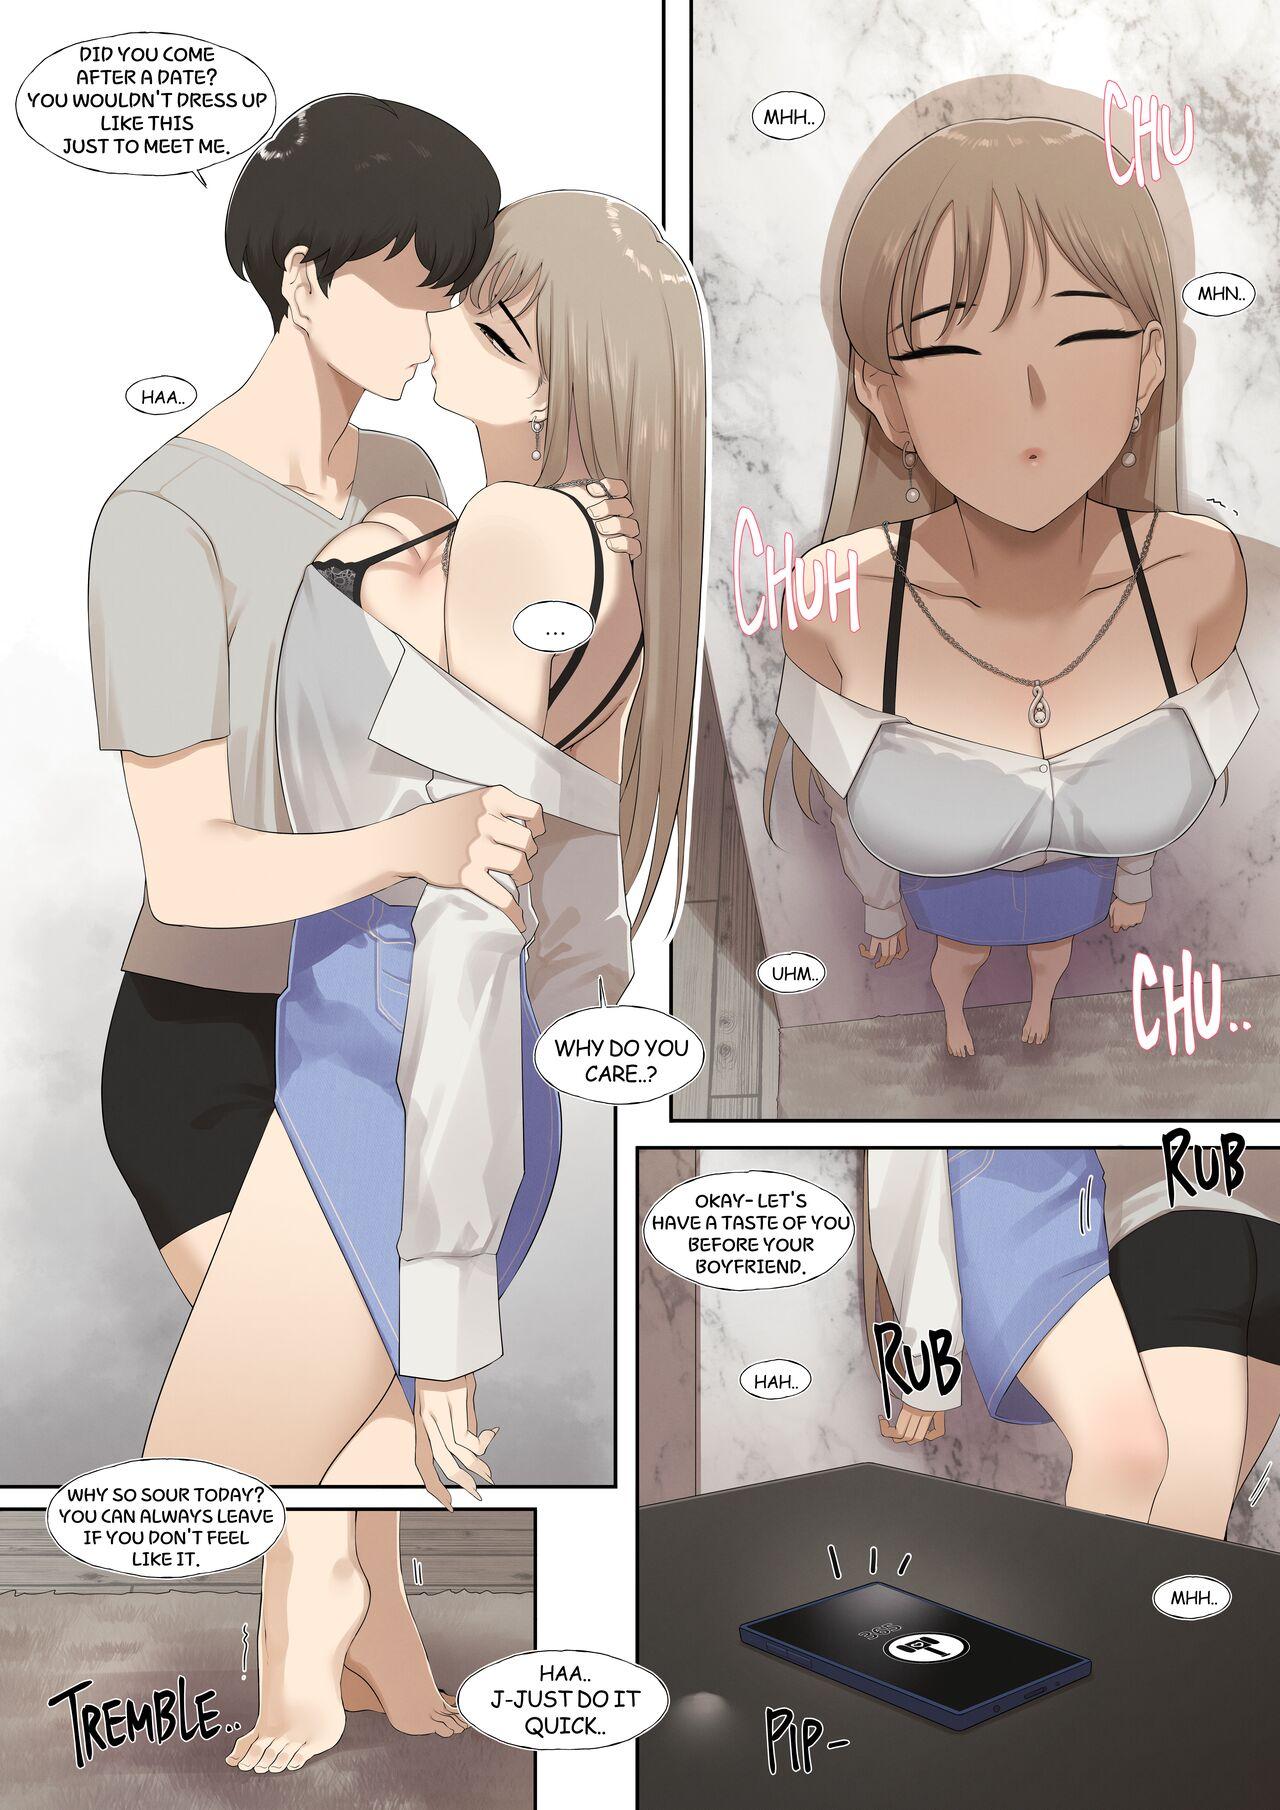 Best Blowjob Common sense alteration - A world one can be forgiven with mating - Original Throat Fuck - Page 4